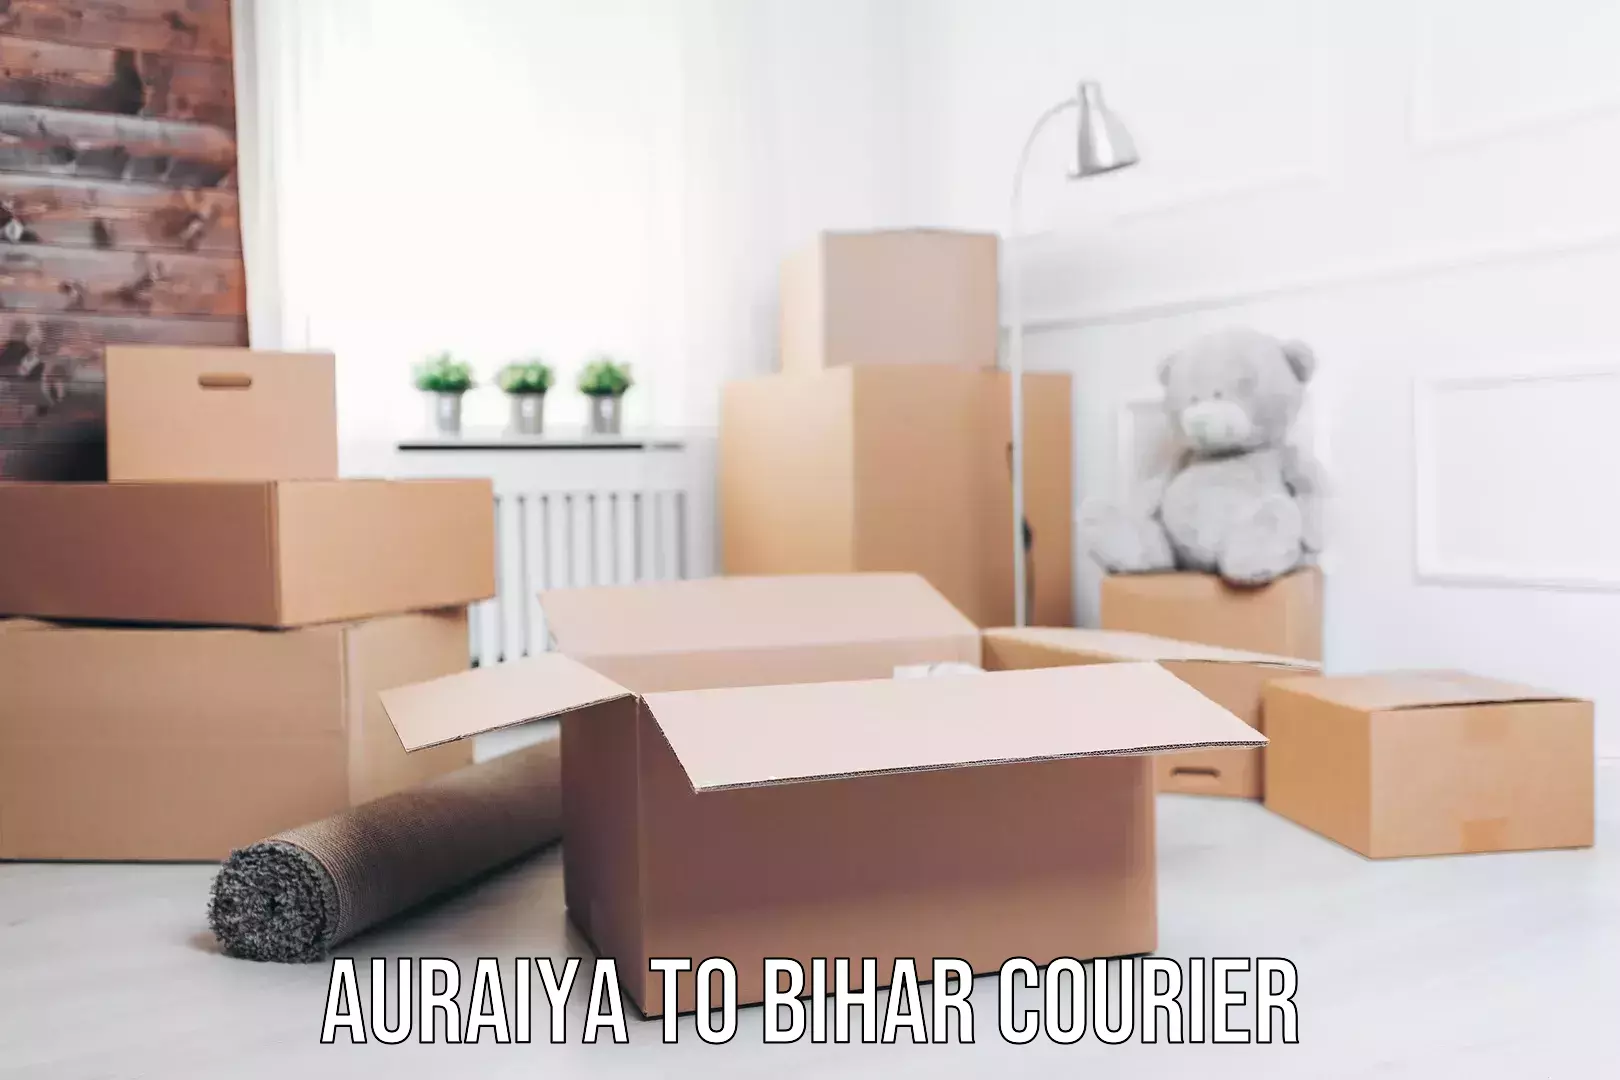 State-of-the-art courier technology Auraiya to Fatwah